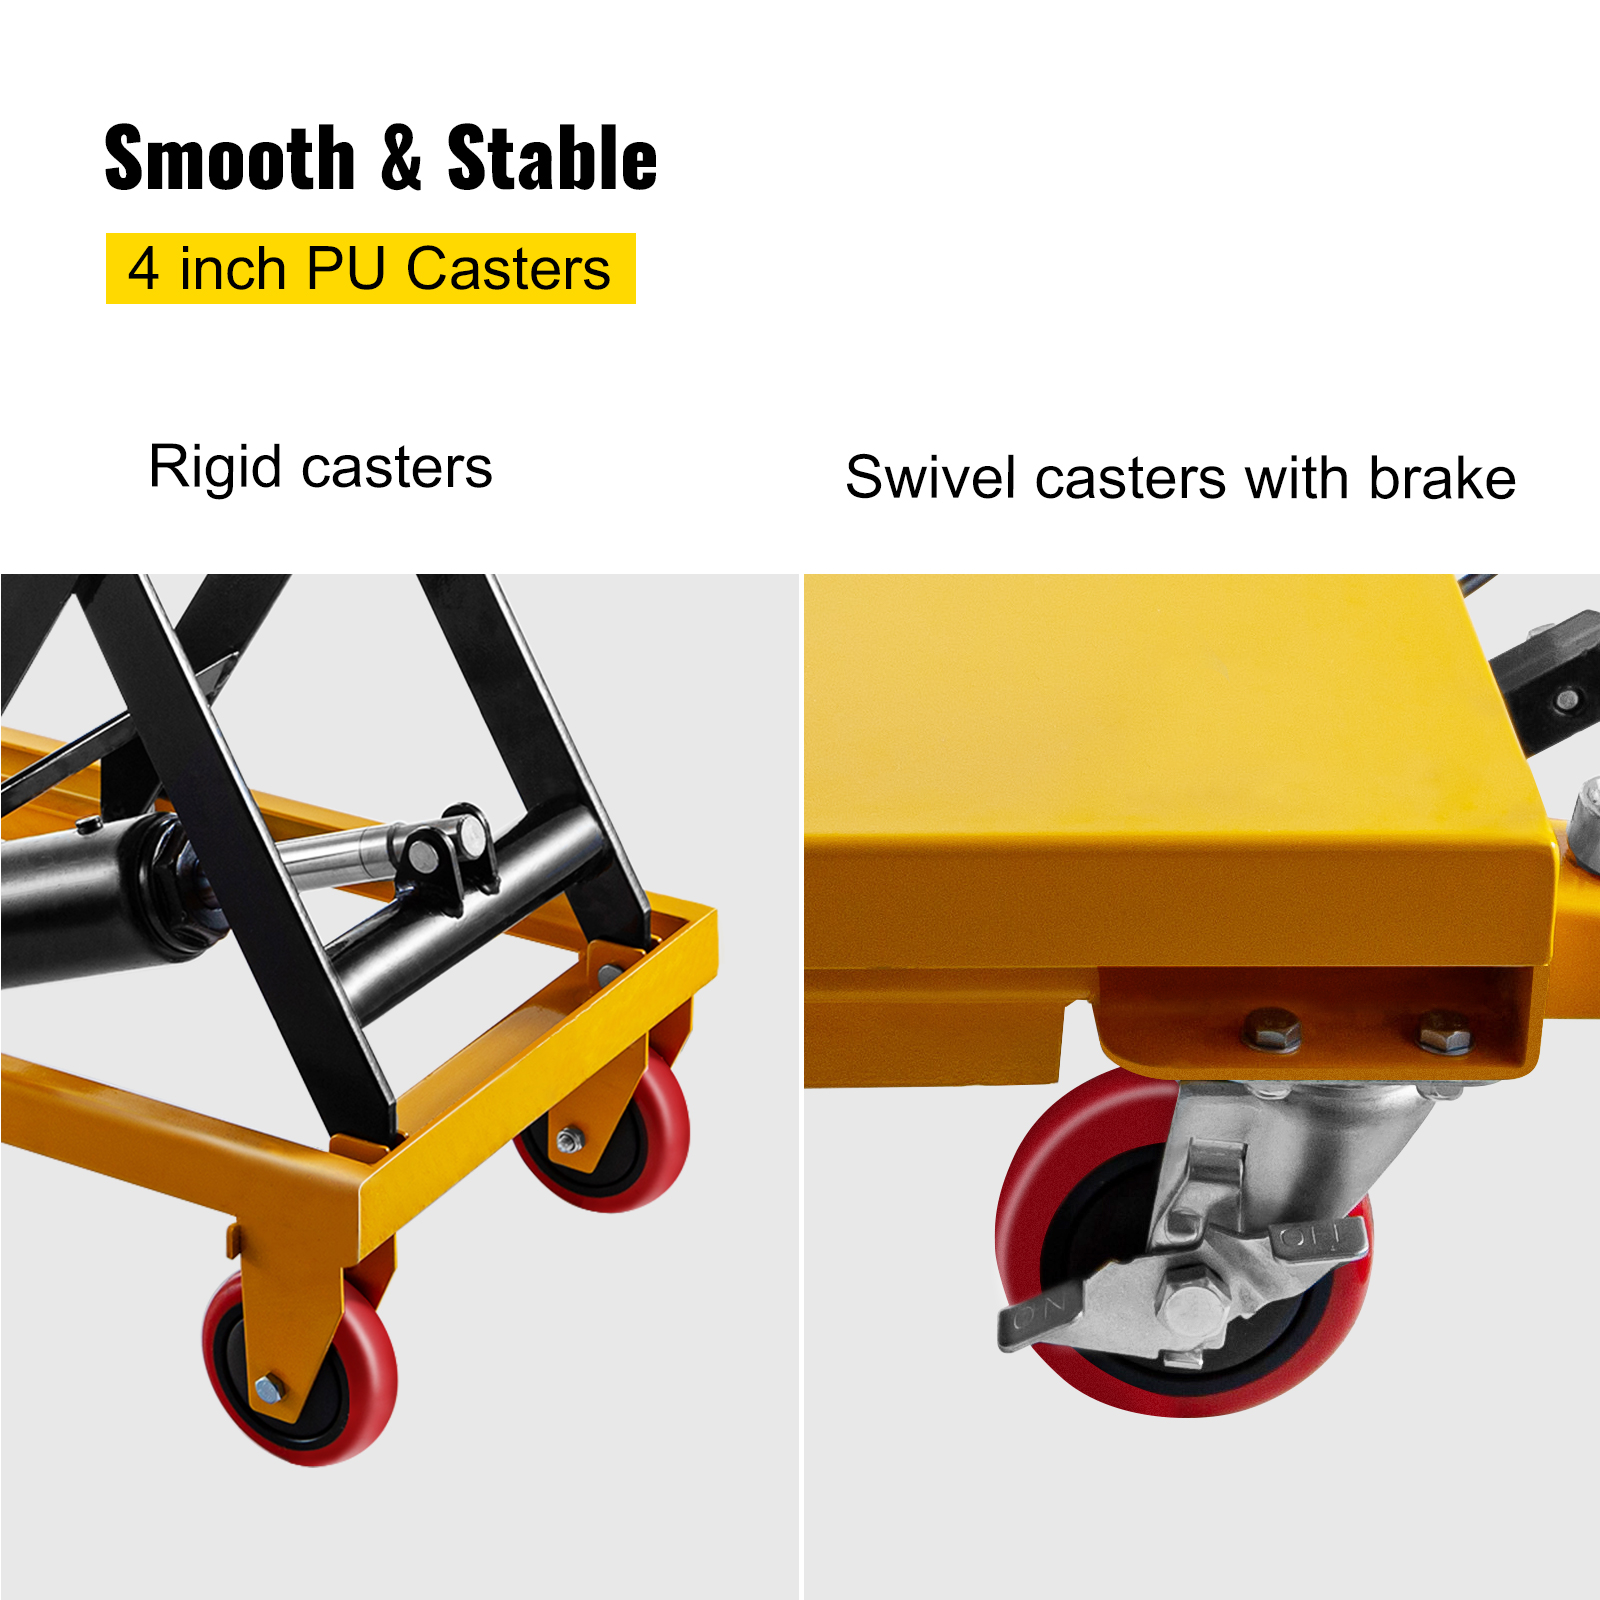 770lbs Capacity Hydraulic Scissor Cart Double Scissor Lift Cart w/Foot Pump VEVOR Hydraulic Lift Table Cart 27.6 x 17.7 Table Size 51.2 Lifting Height Scissor Lift Table for Freight Lifting